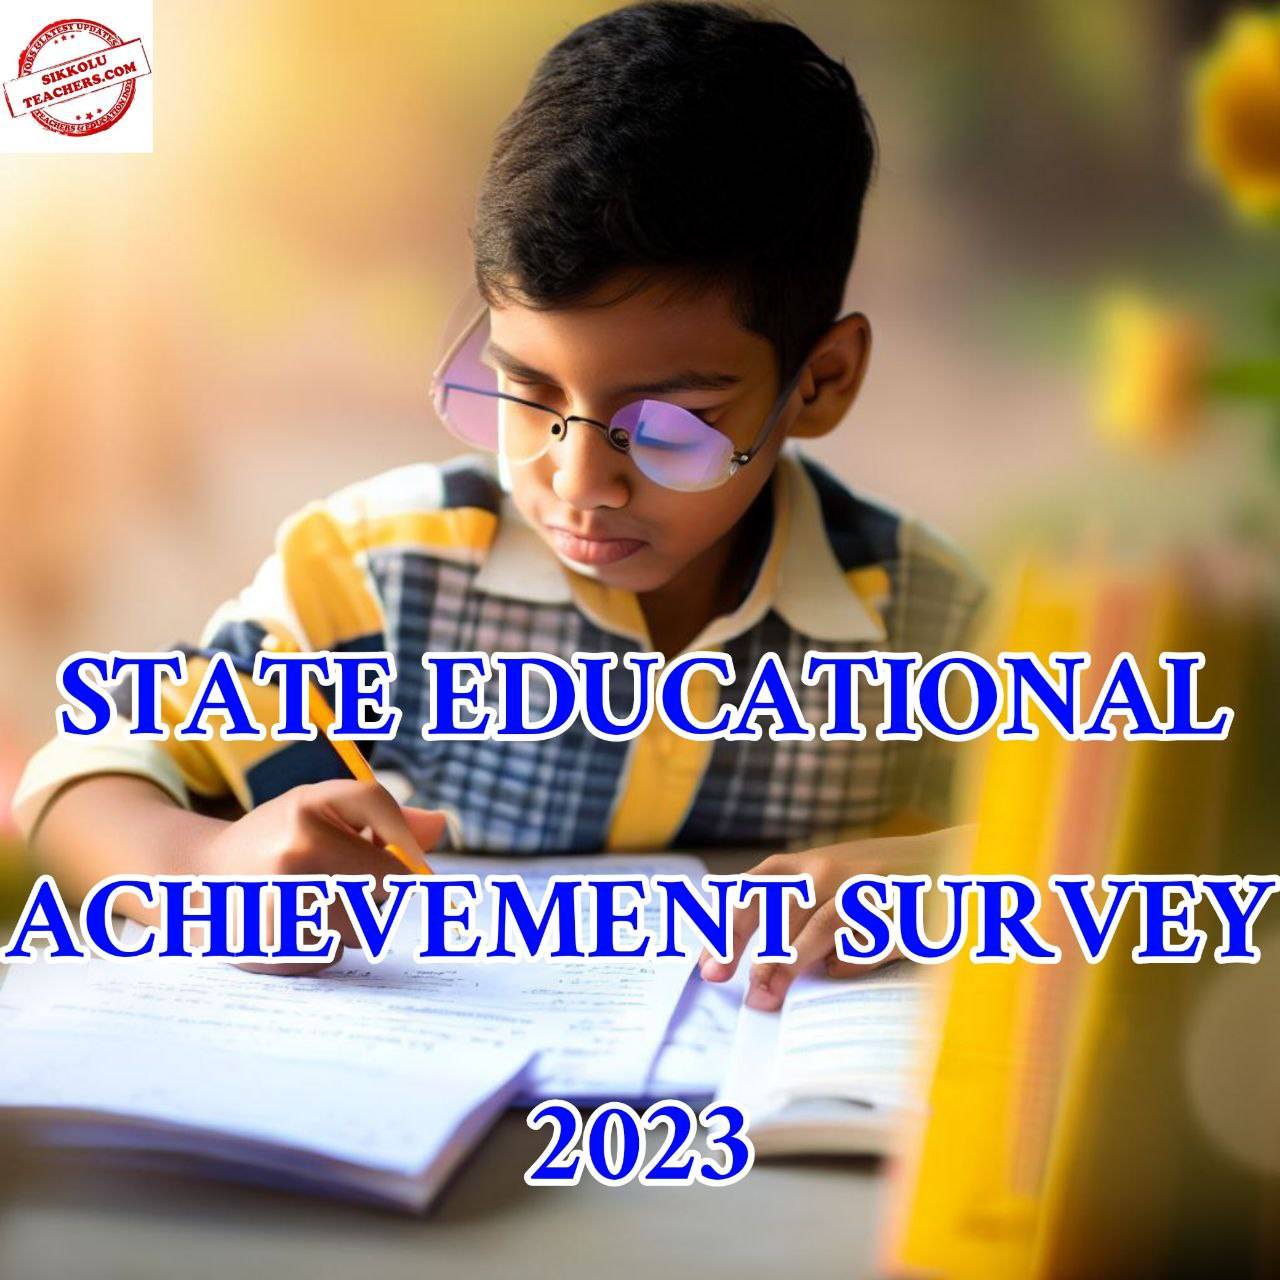 NAS/ SEAS: State Educational Achievement Survey on 3'd November 2023 by NCERT